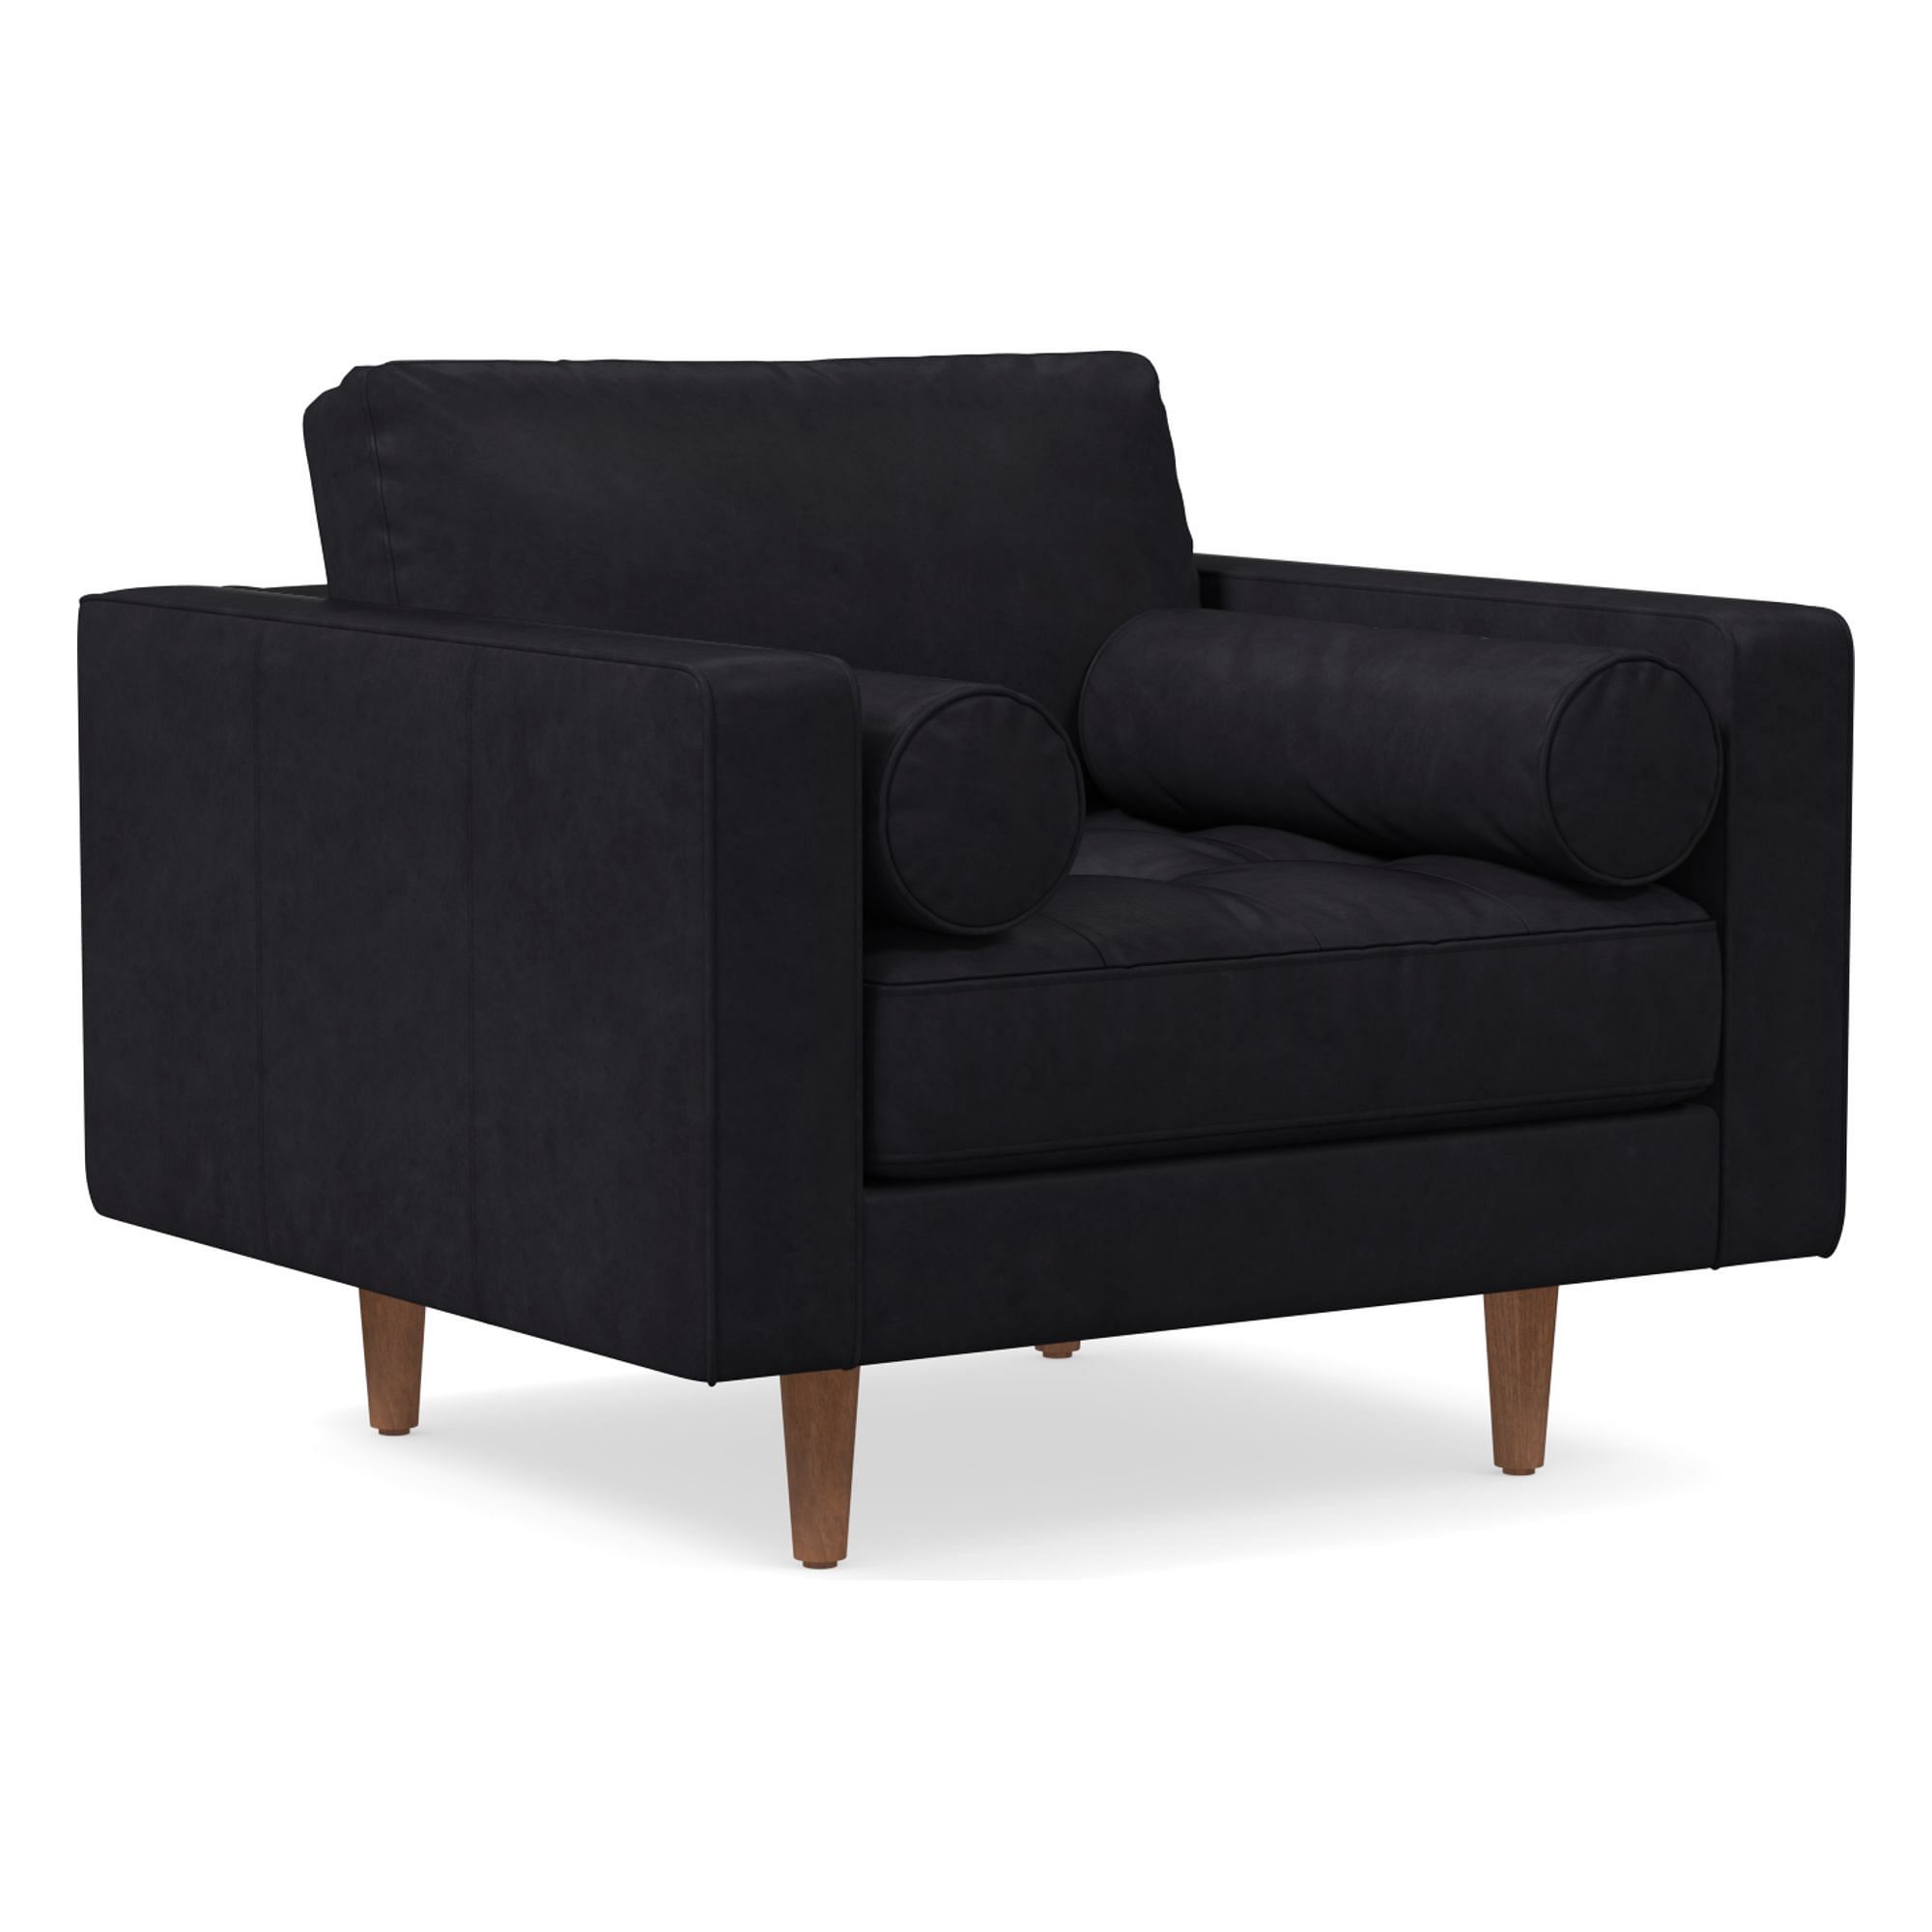 Dennes Leather Chair | West Elm